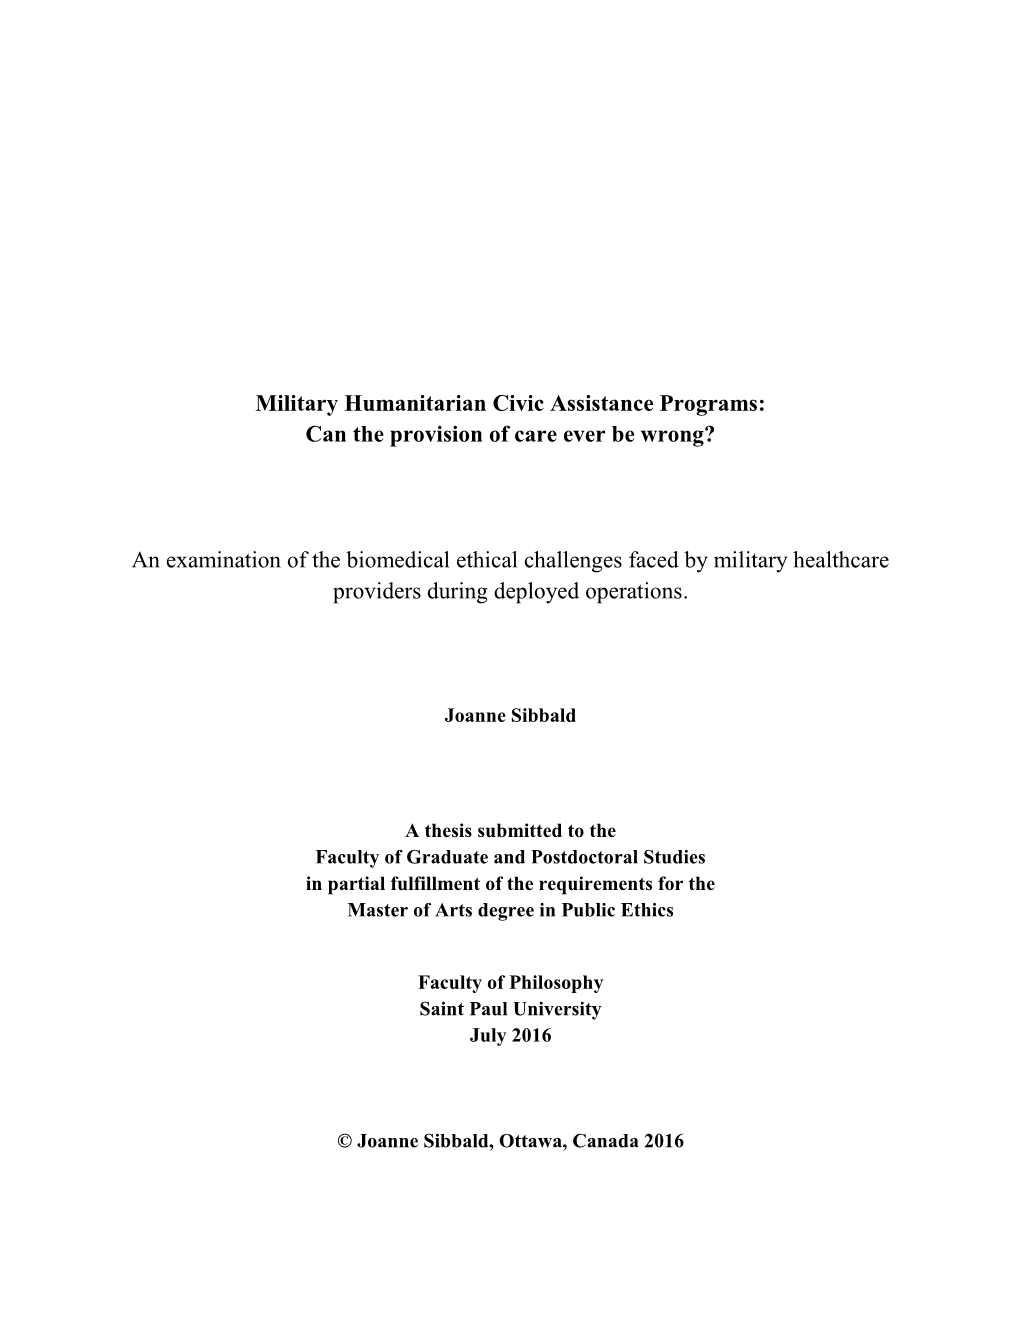 Military Humanitarian Civic Assistance Programs: Can the Provision of Care Ever Be Wrong?